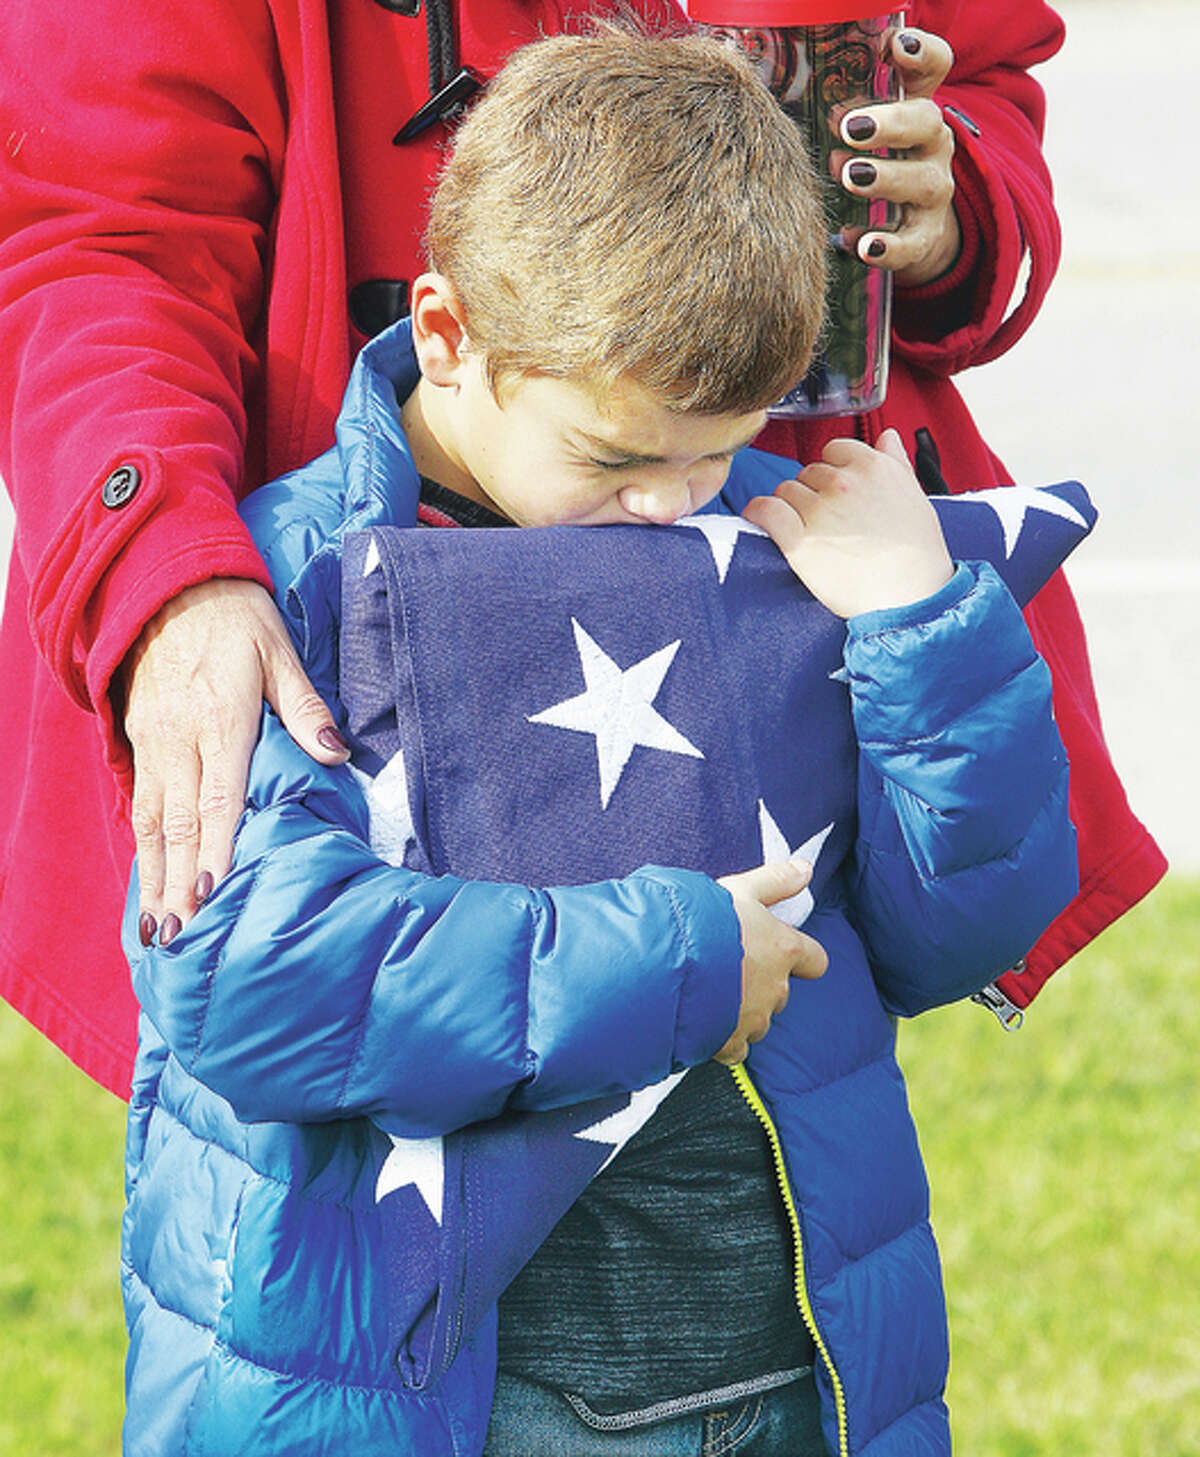 Reid Murray, 8, clutches the folded flag that was his grandfather’s during the annual Veterans Day ceremony in front of the Doughboy Statue at the Alton VFW Post 1308 Wednesday. Murray’s grandfather, Thomas E. Hooper of Alton, was a Vietnam War veteran who passed away in September. A crowd of about 50 attended the annual ceremony.